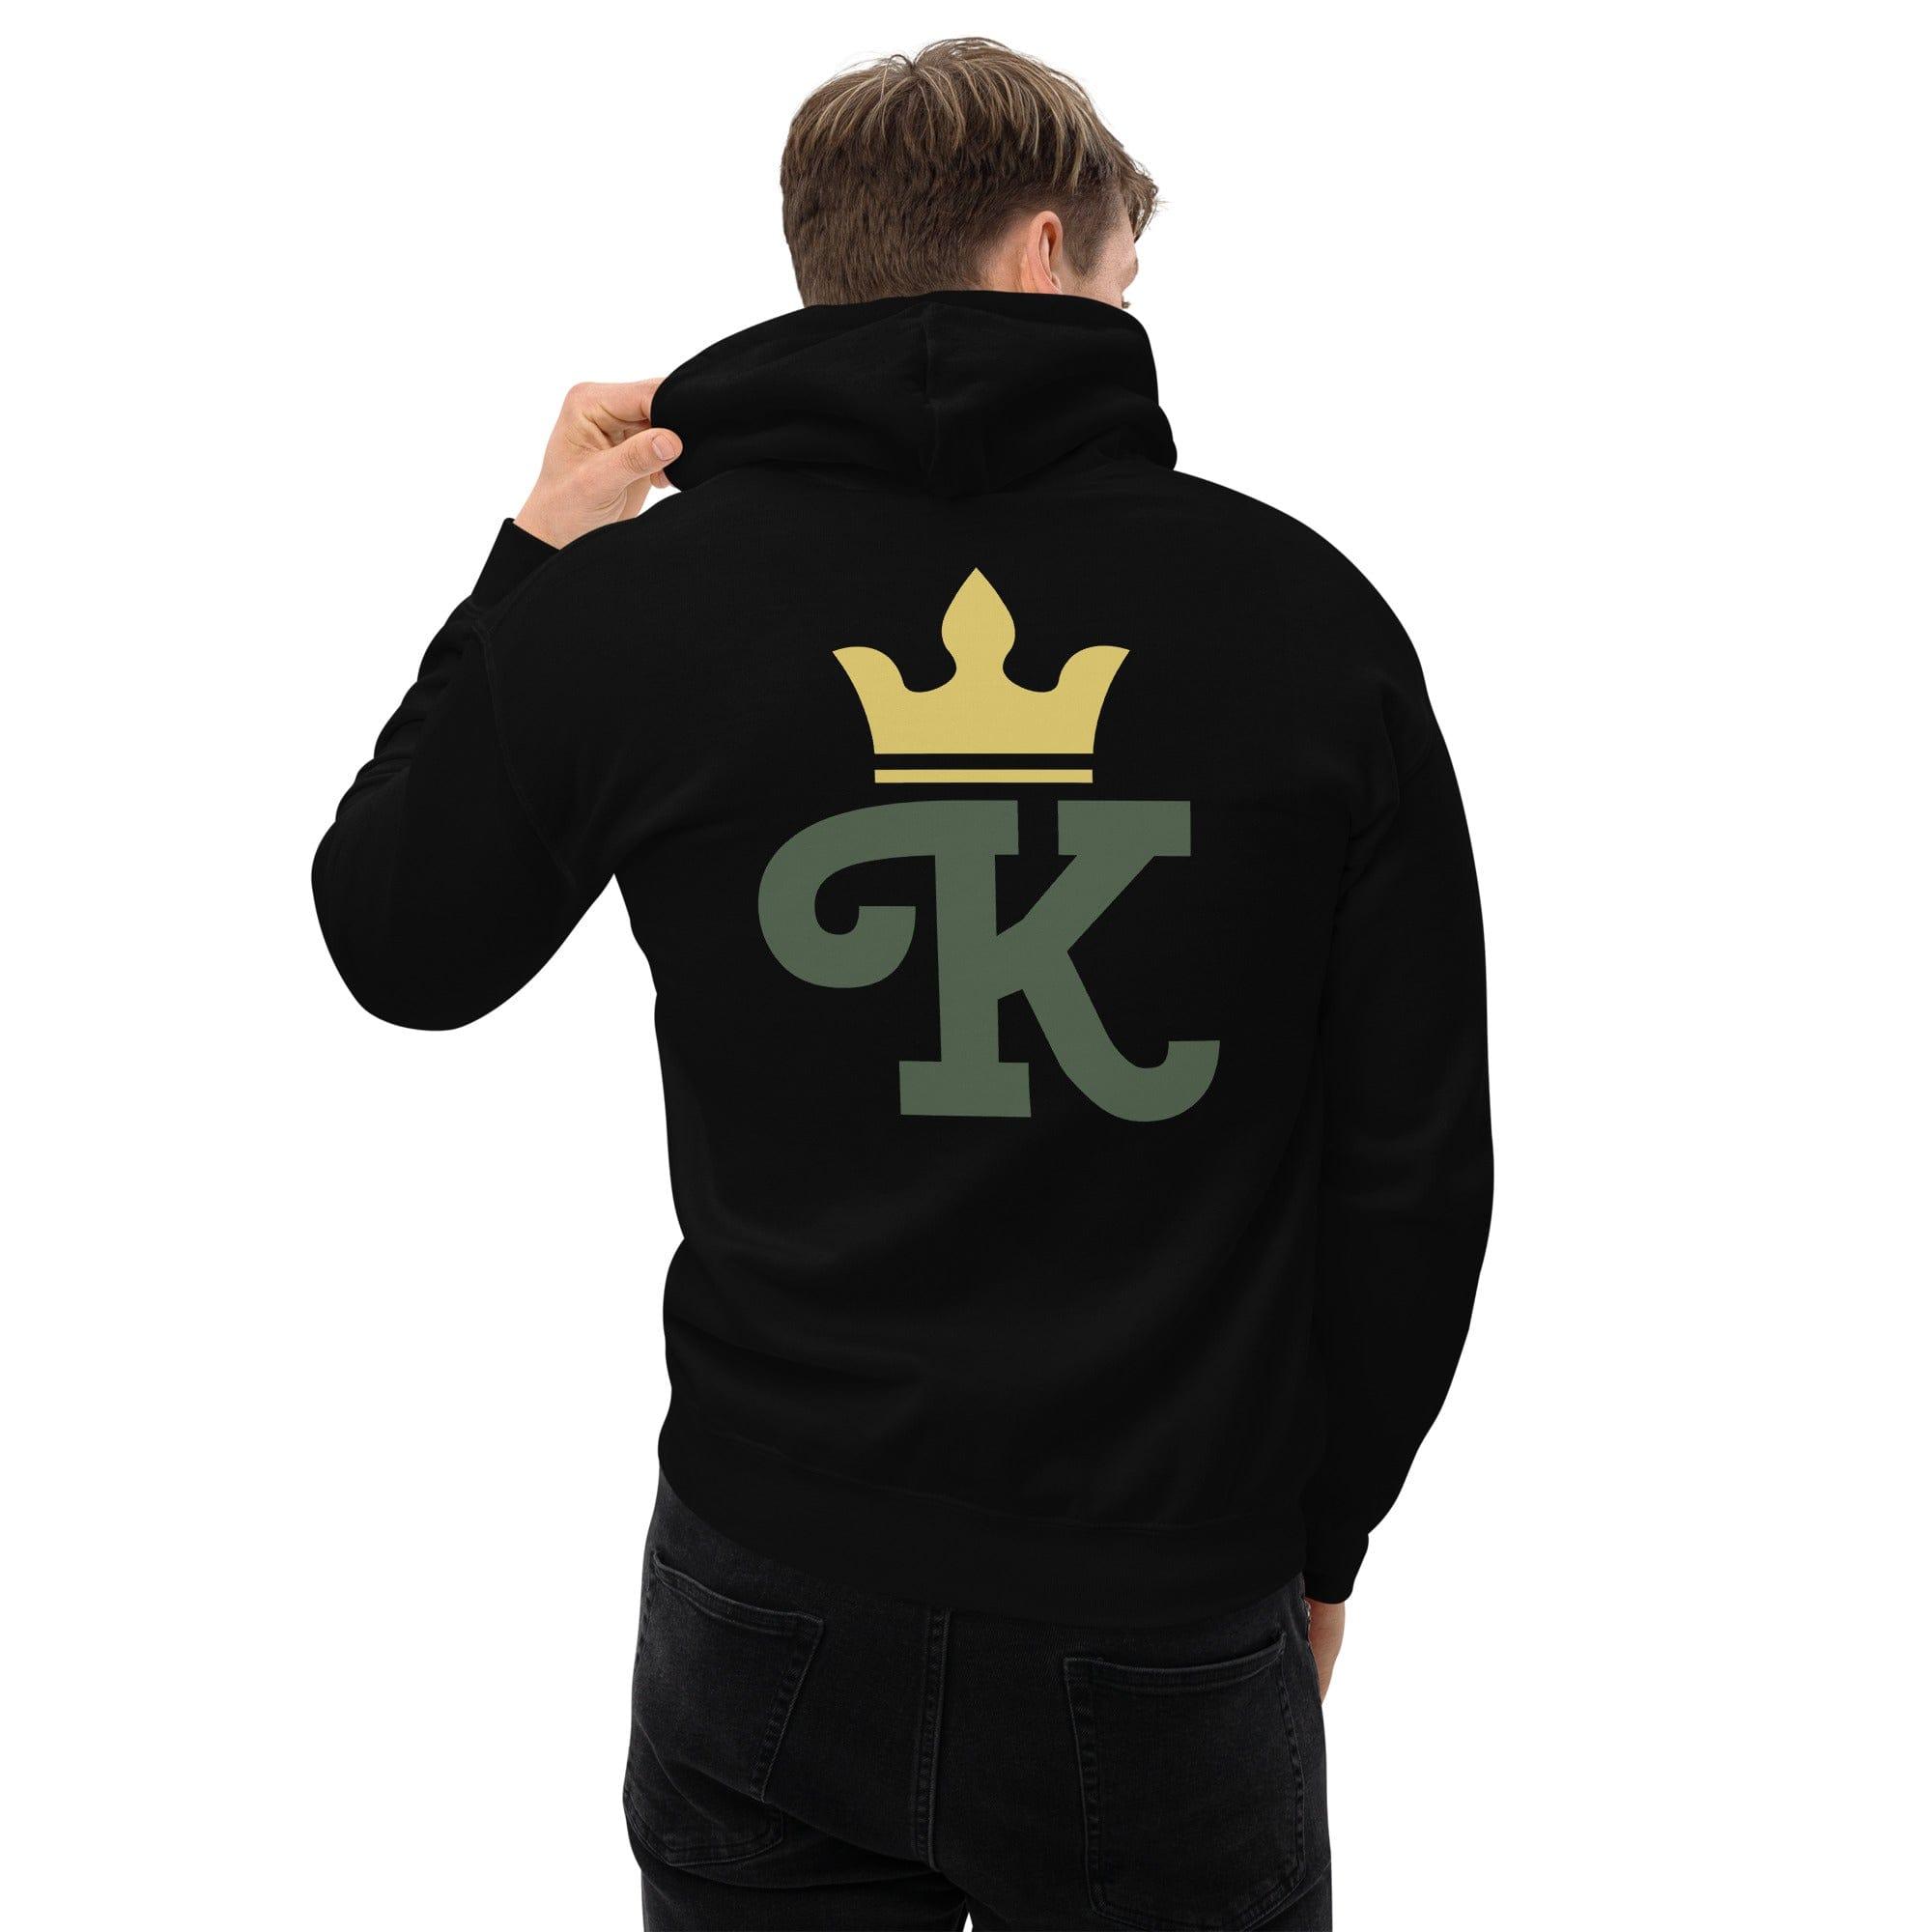 Father's Day Hoodie Letter K with Gold Crown Rear Design Placement Unisex Pullover - TopKoalaTee